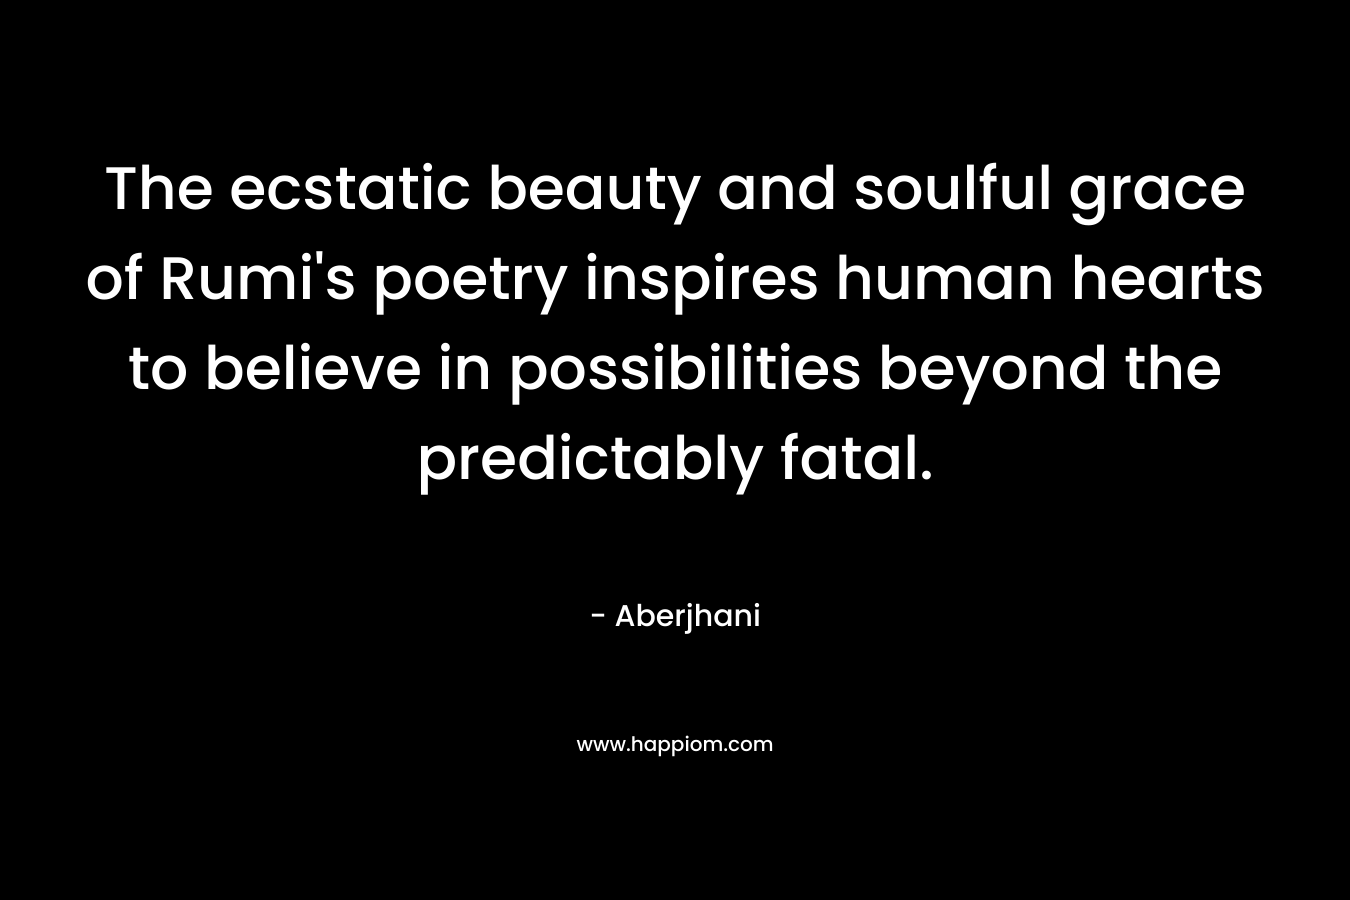 The ecstatic beauty and soulful grace of Rumi’s poetry inspires human hearts to believe in possibilities beyond the predictably fatal. – Aberjhani